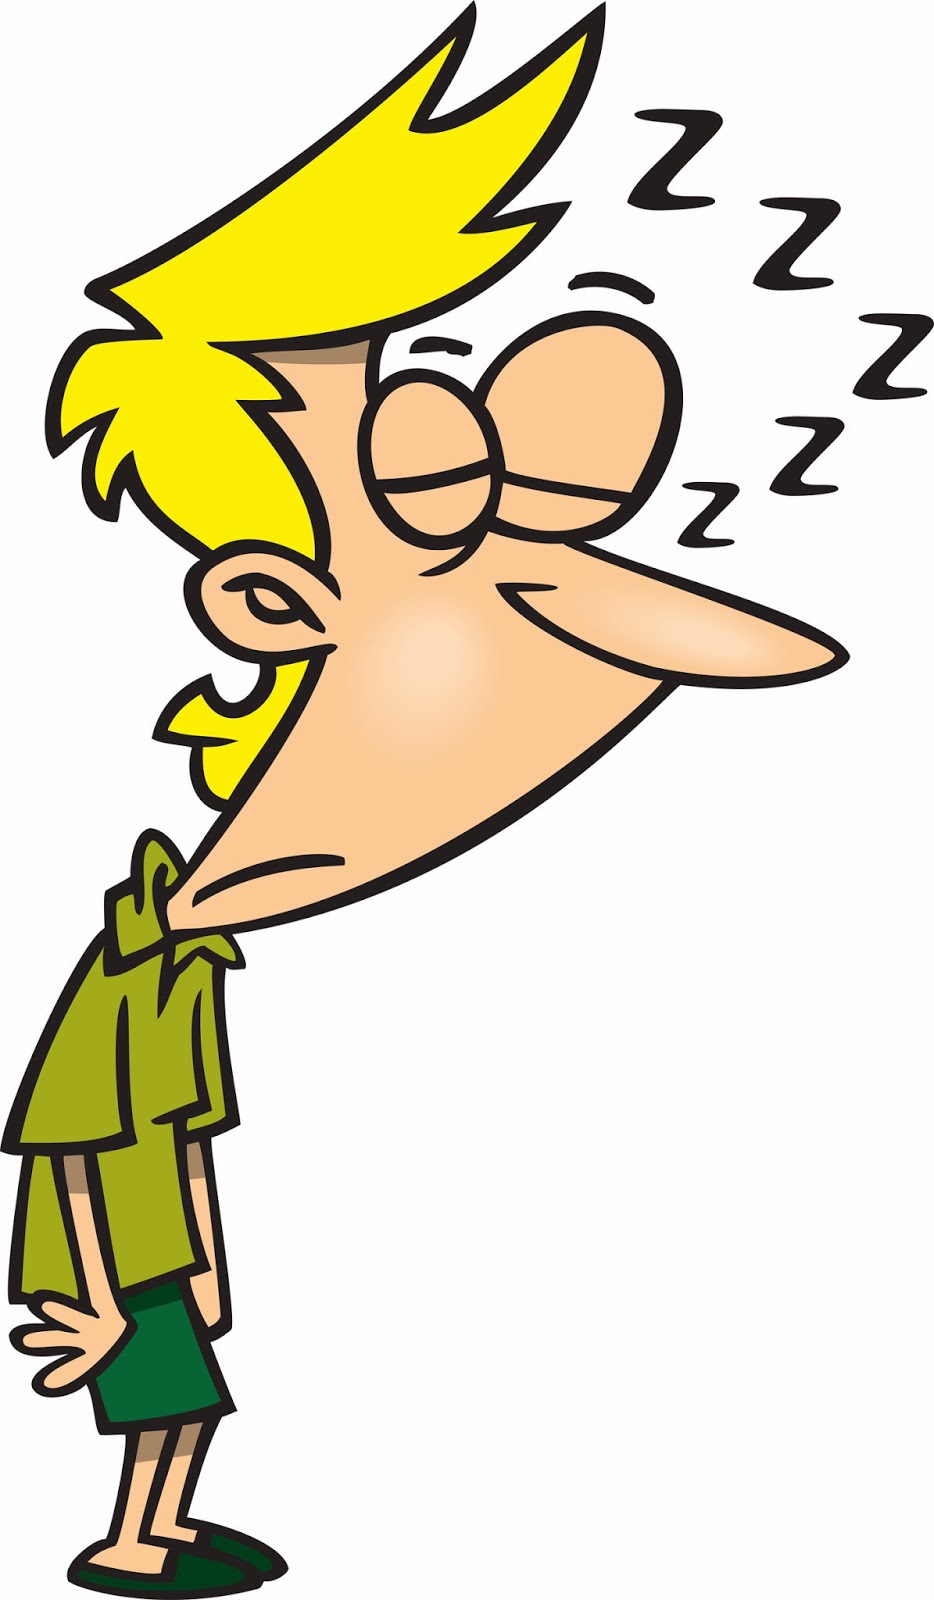 Free Sleepy Images, Download Free Clip Art, Free Clip Art on.